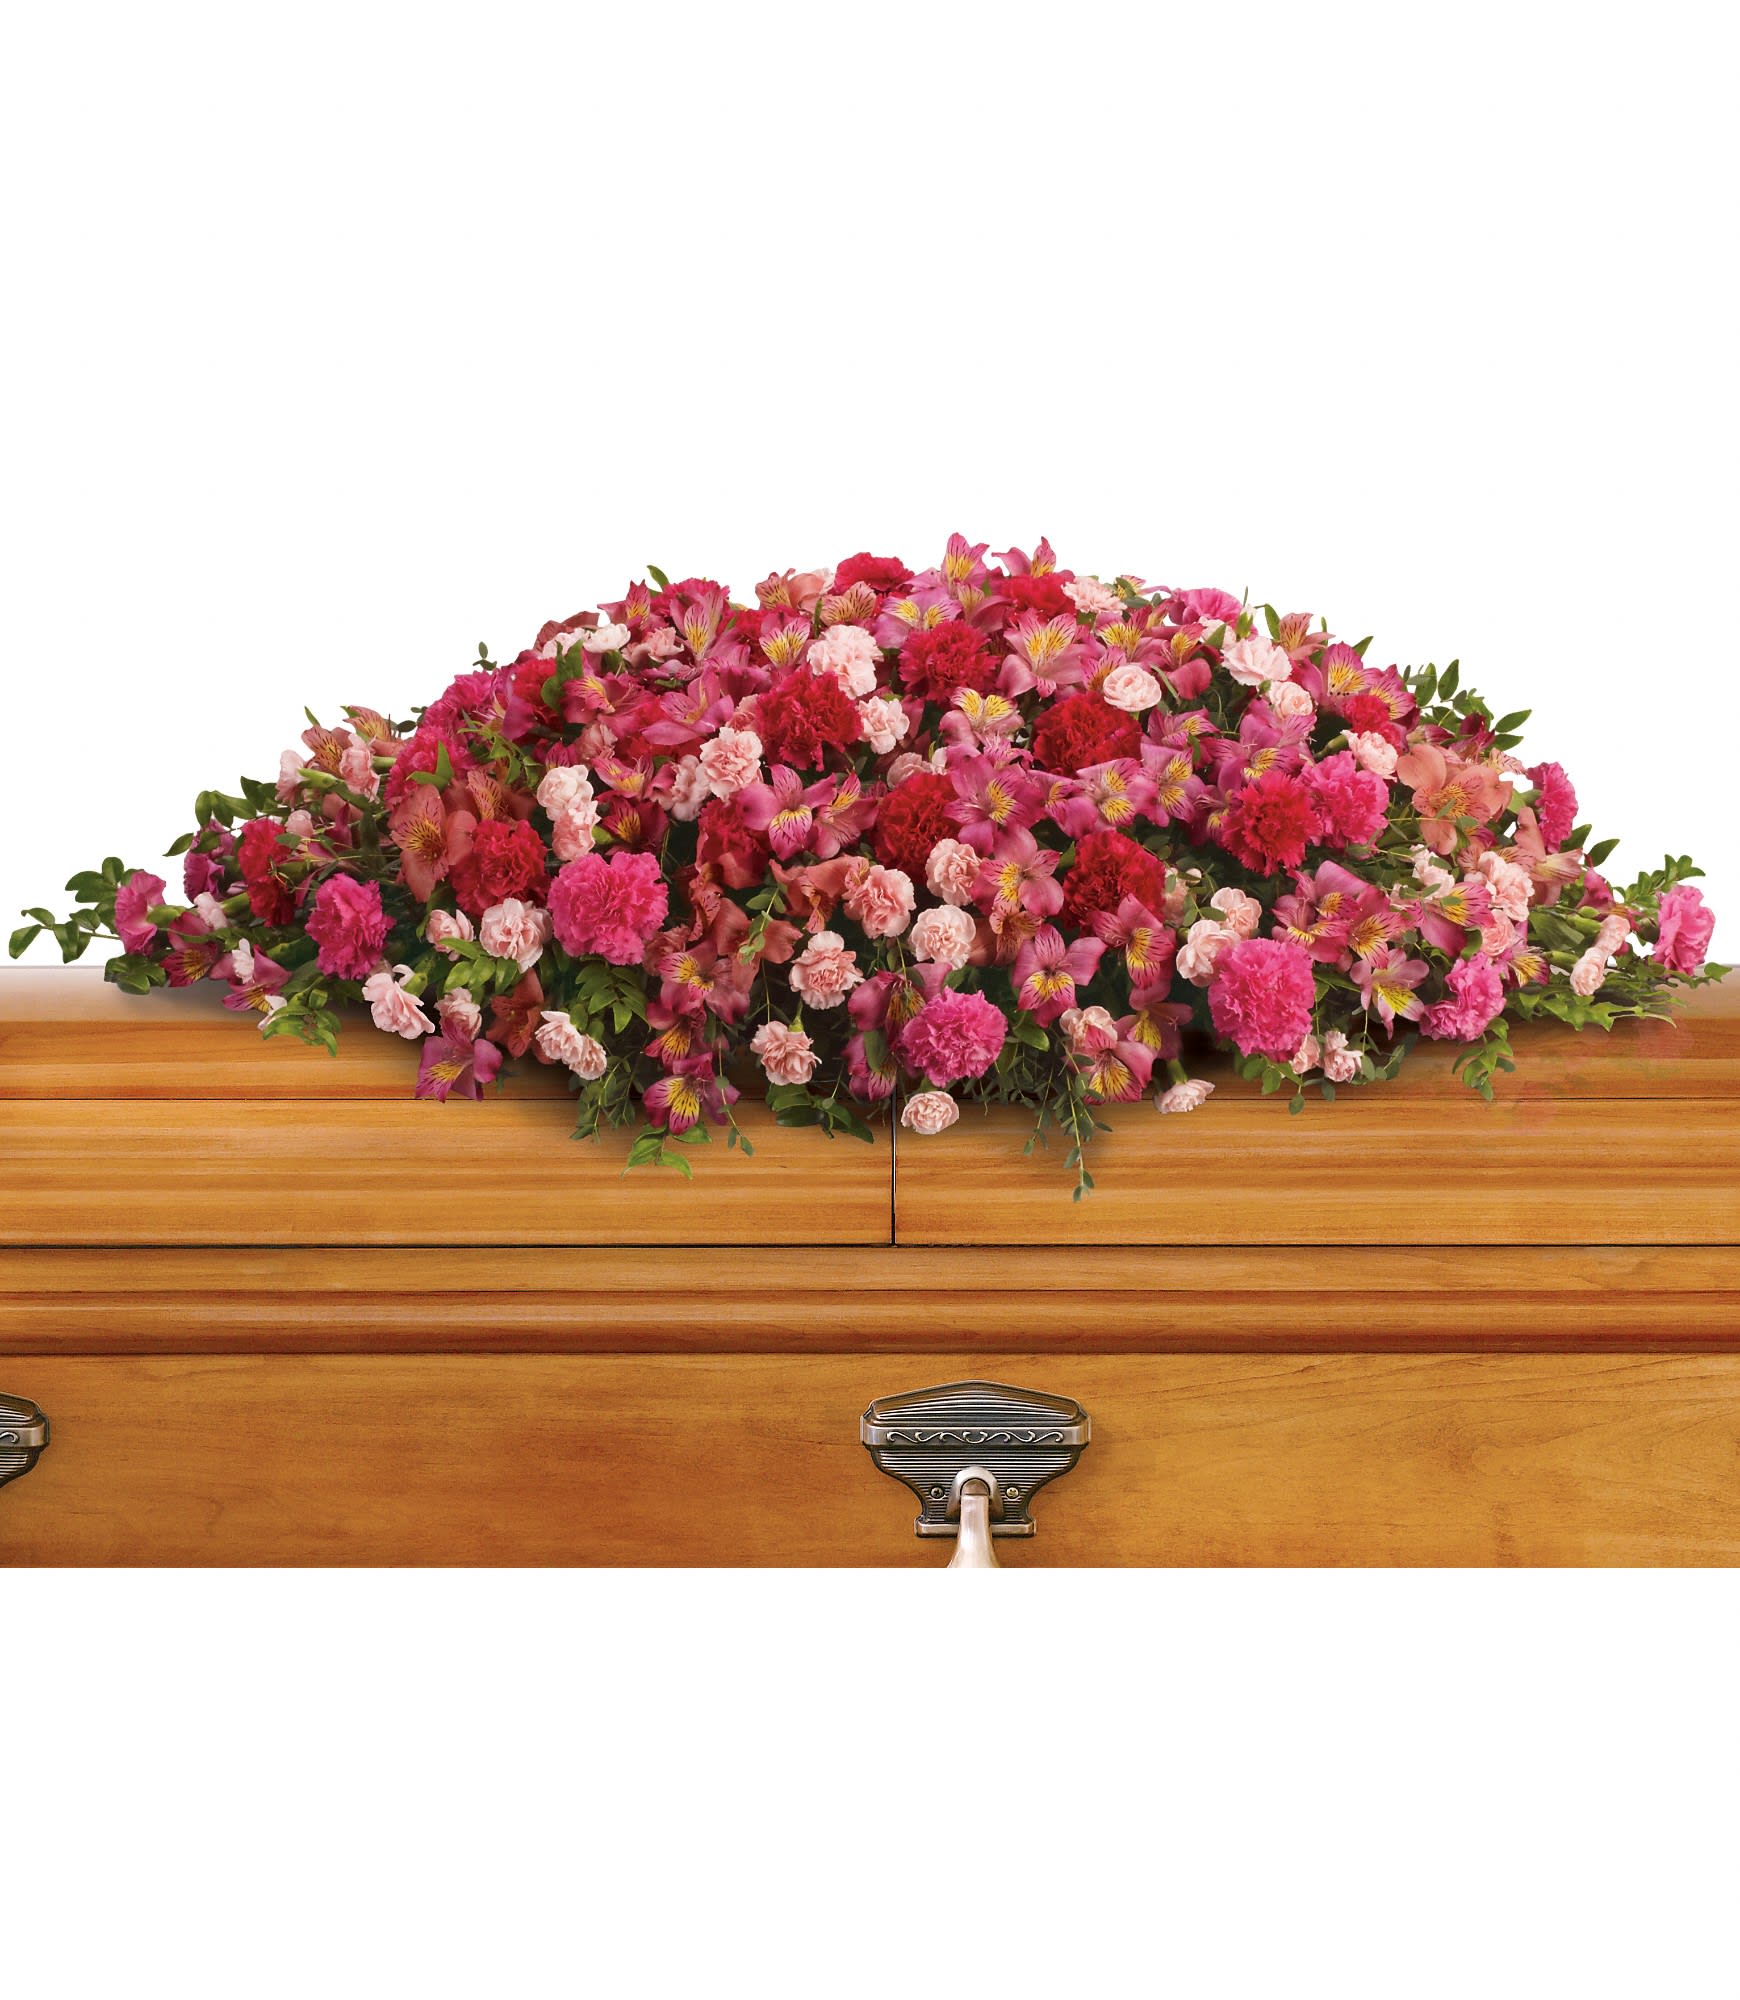 A Life Loved Casket Spray by Teleflora - As a tribute to a special person who has passed, this magnificent cascade of pink floral favorites is a radiant testament of profound and lasting love. 